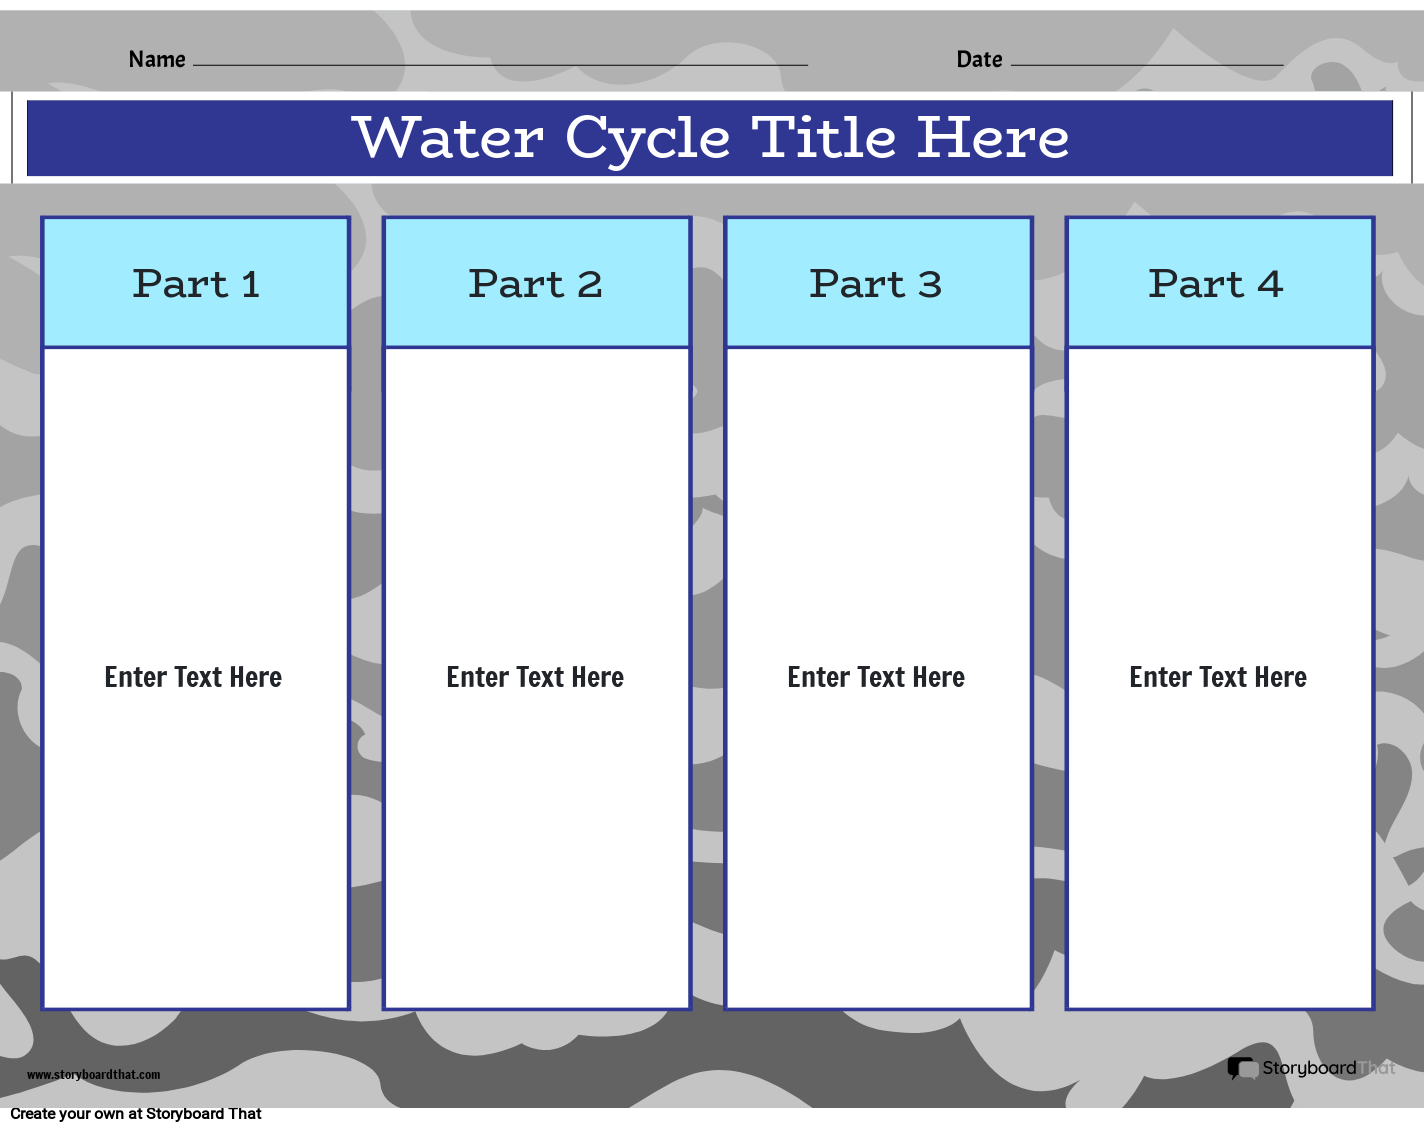 Four Phases of the Water Cycle